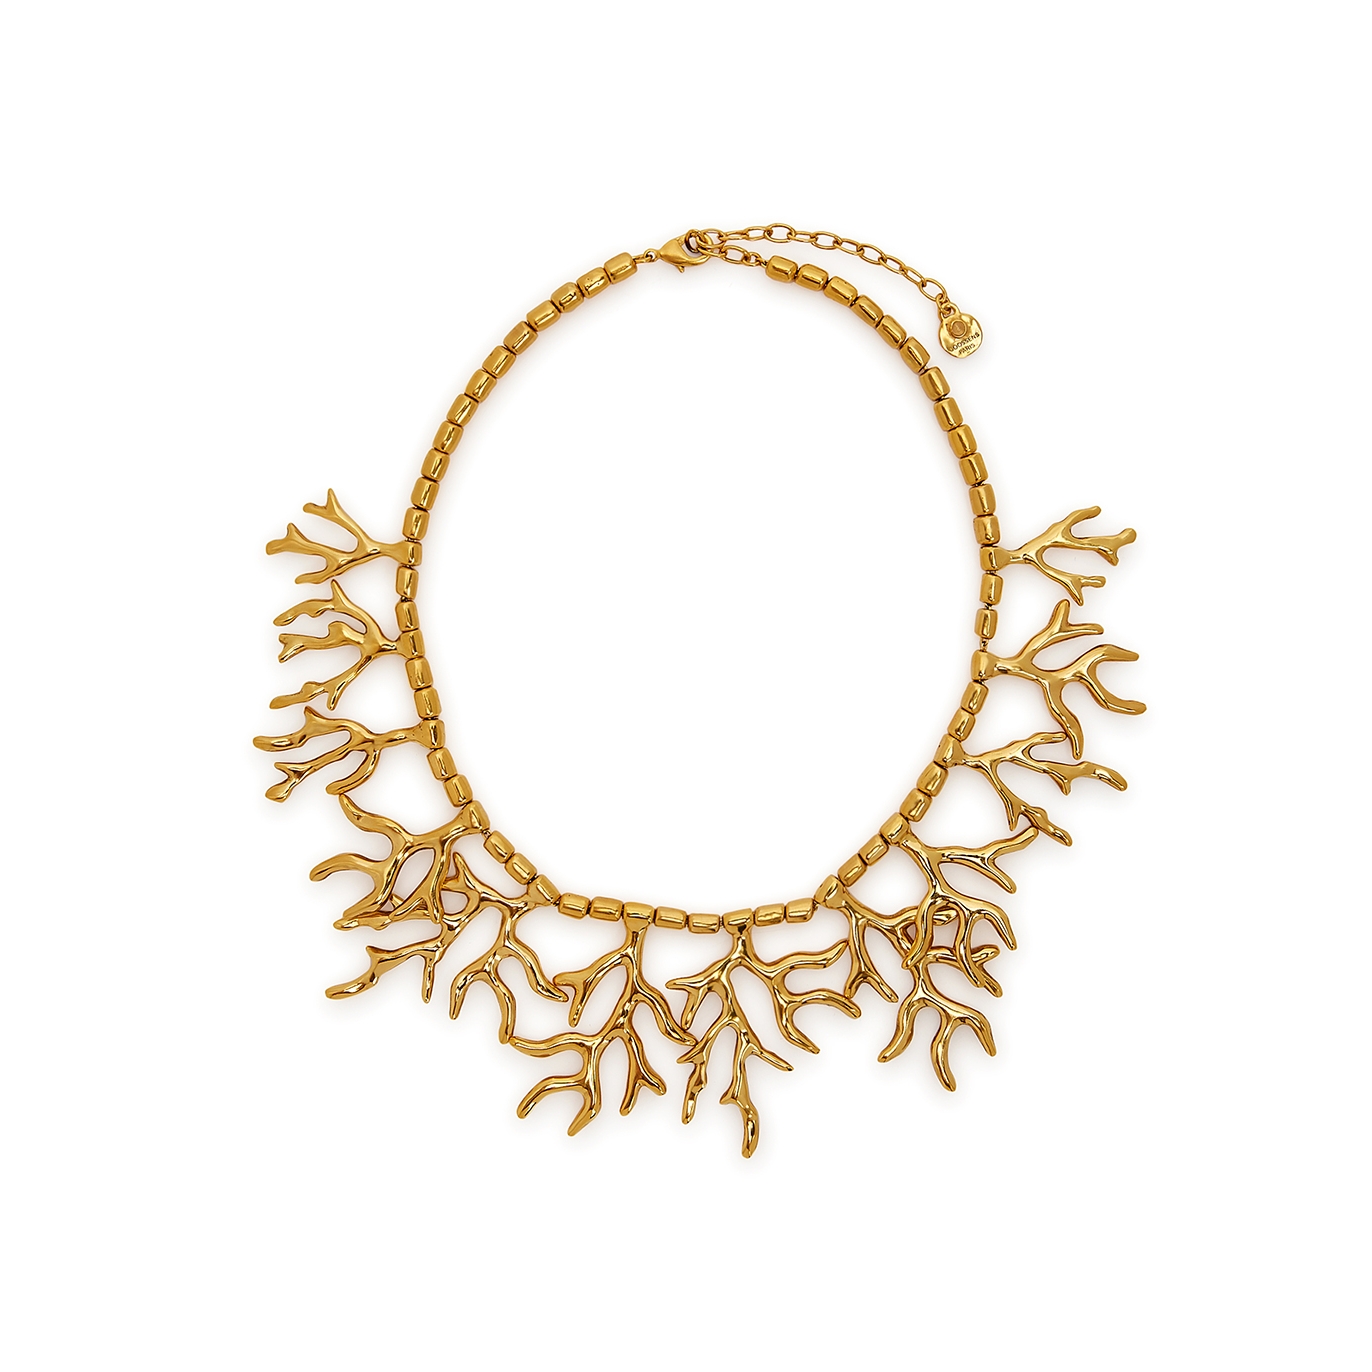 Goossens Maunaloa Coral 24kt Gold-dipped Necklace - One Size